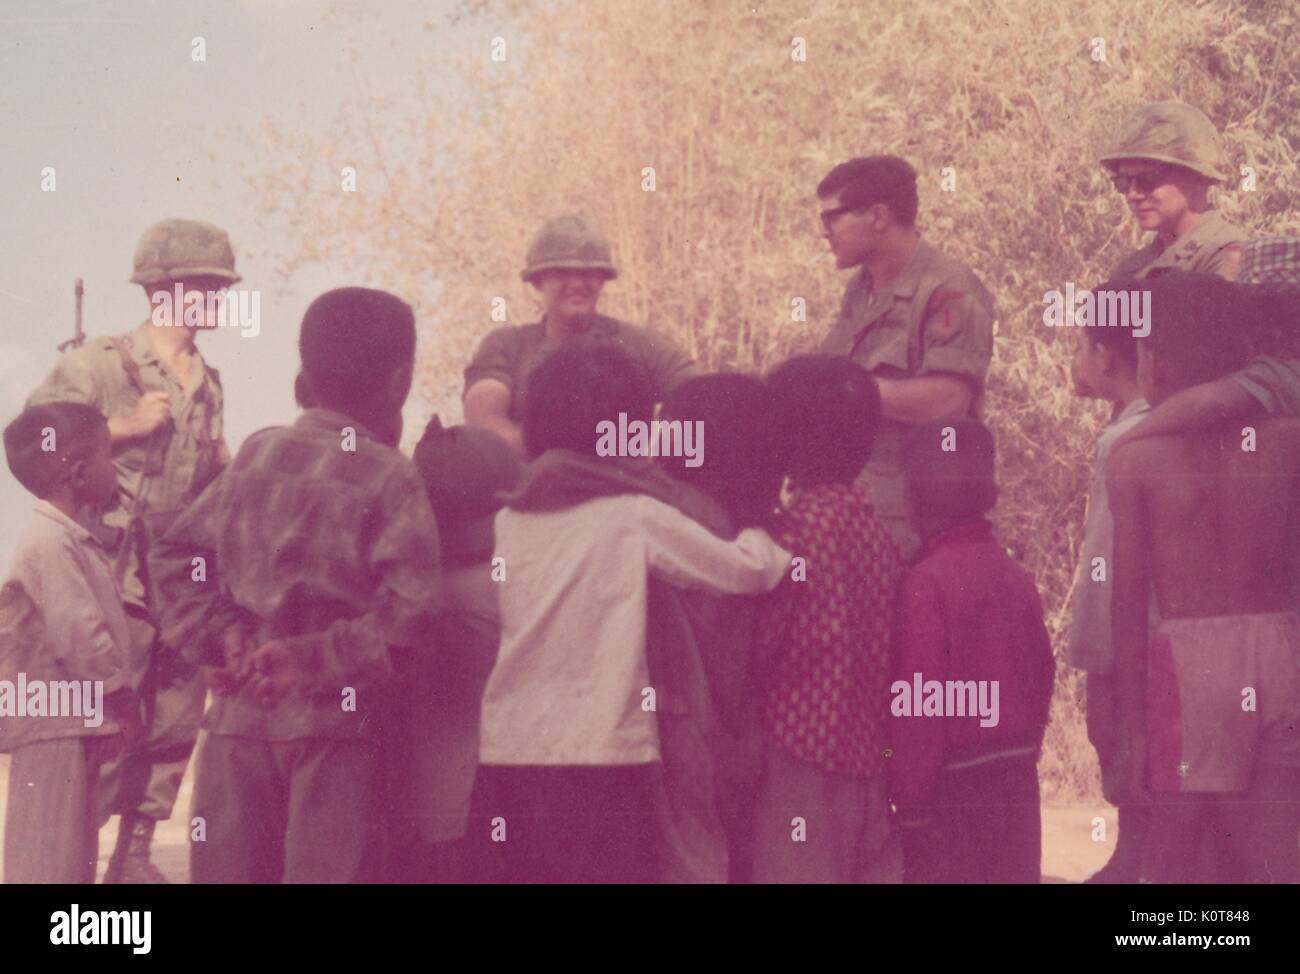 A photograph of a group of United States Army servicemen speaking to a group of Vietnamese children, the servicemen are all in their combat uniforms and one is carrying his rifle, Vietnam, 1968. Stock Photo